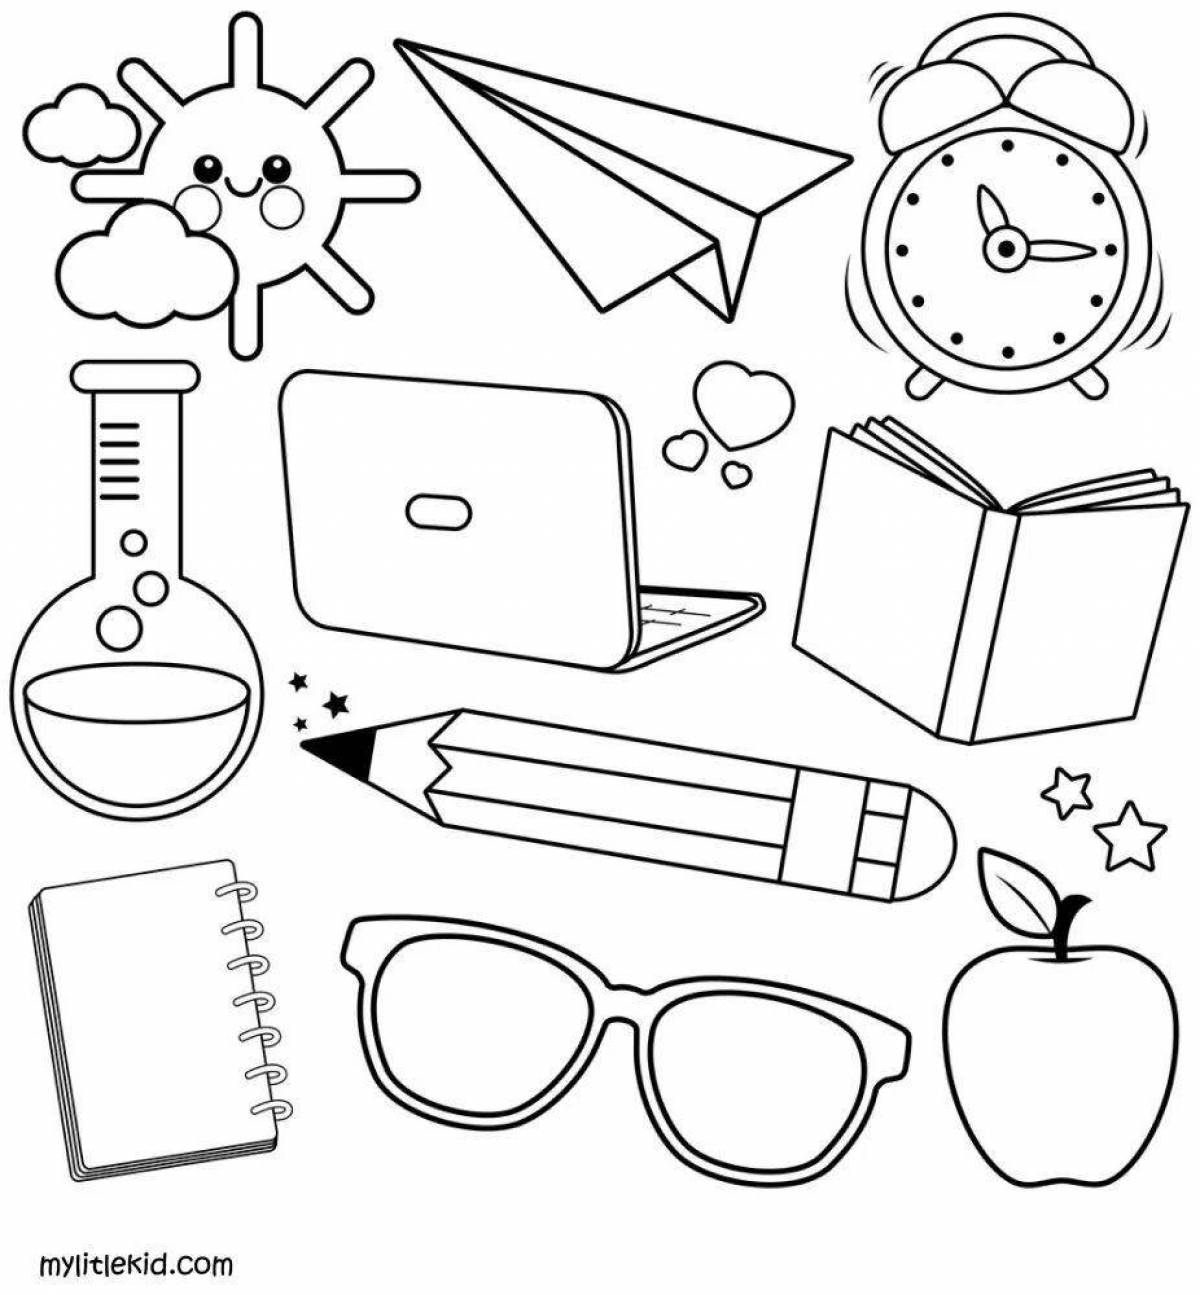 Creative stationery coloring book for girls